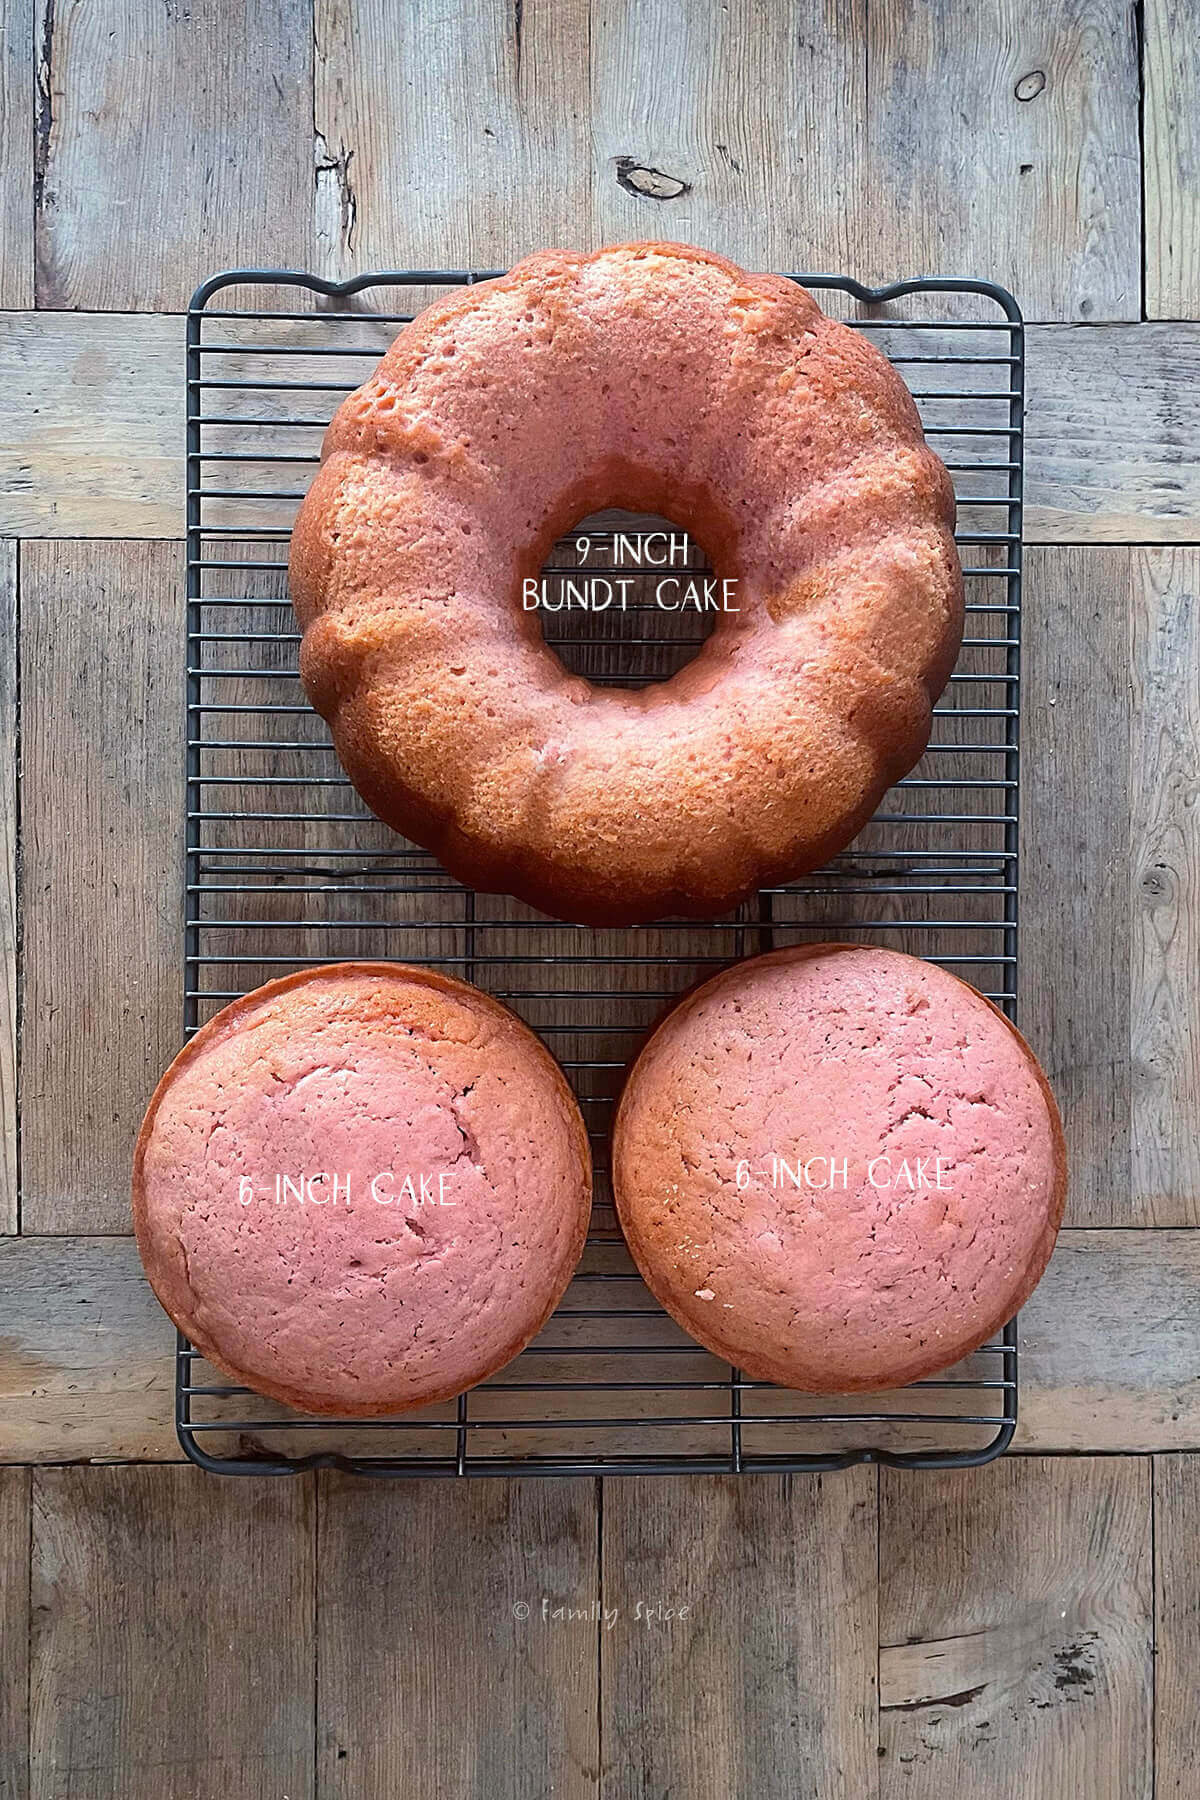 Top view of a pink strawberry bundt cake and two 6-inch strawberry cakes on a cooling rack on a wood table labeled and needed to make a barbie cake